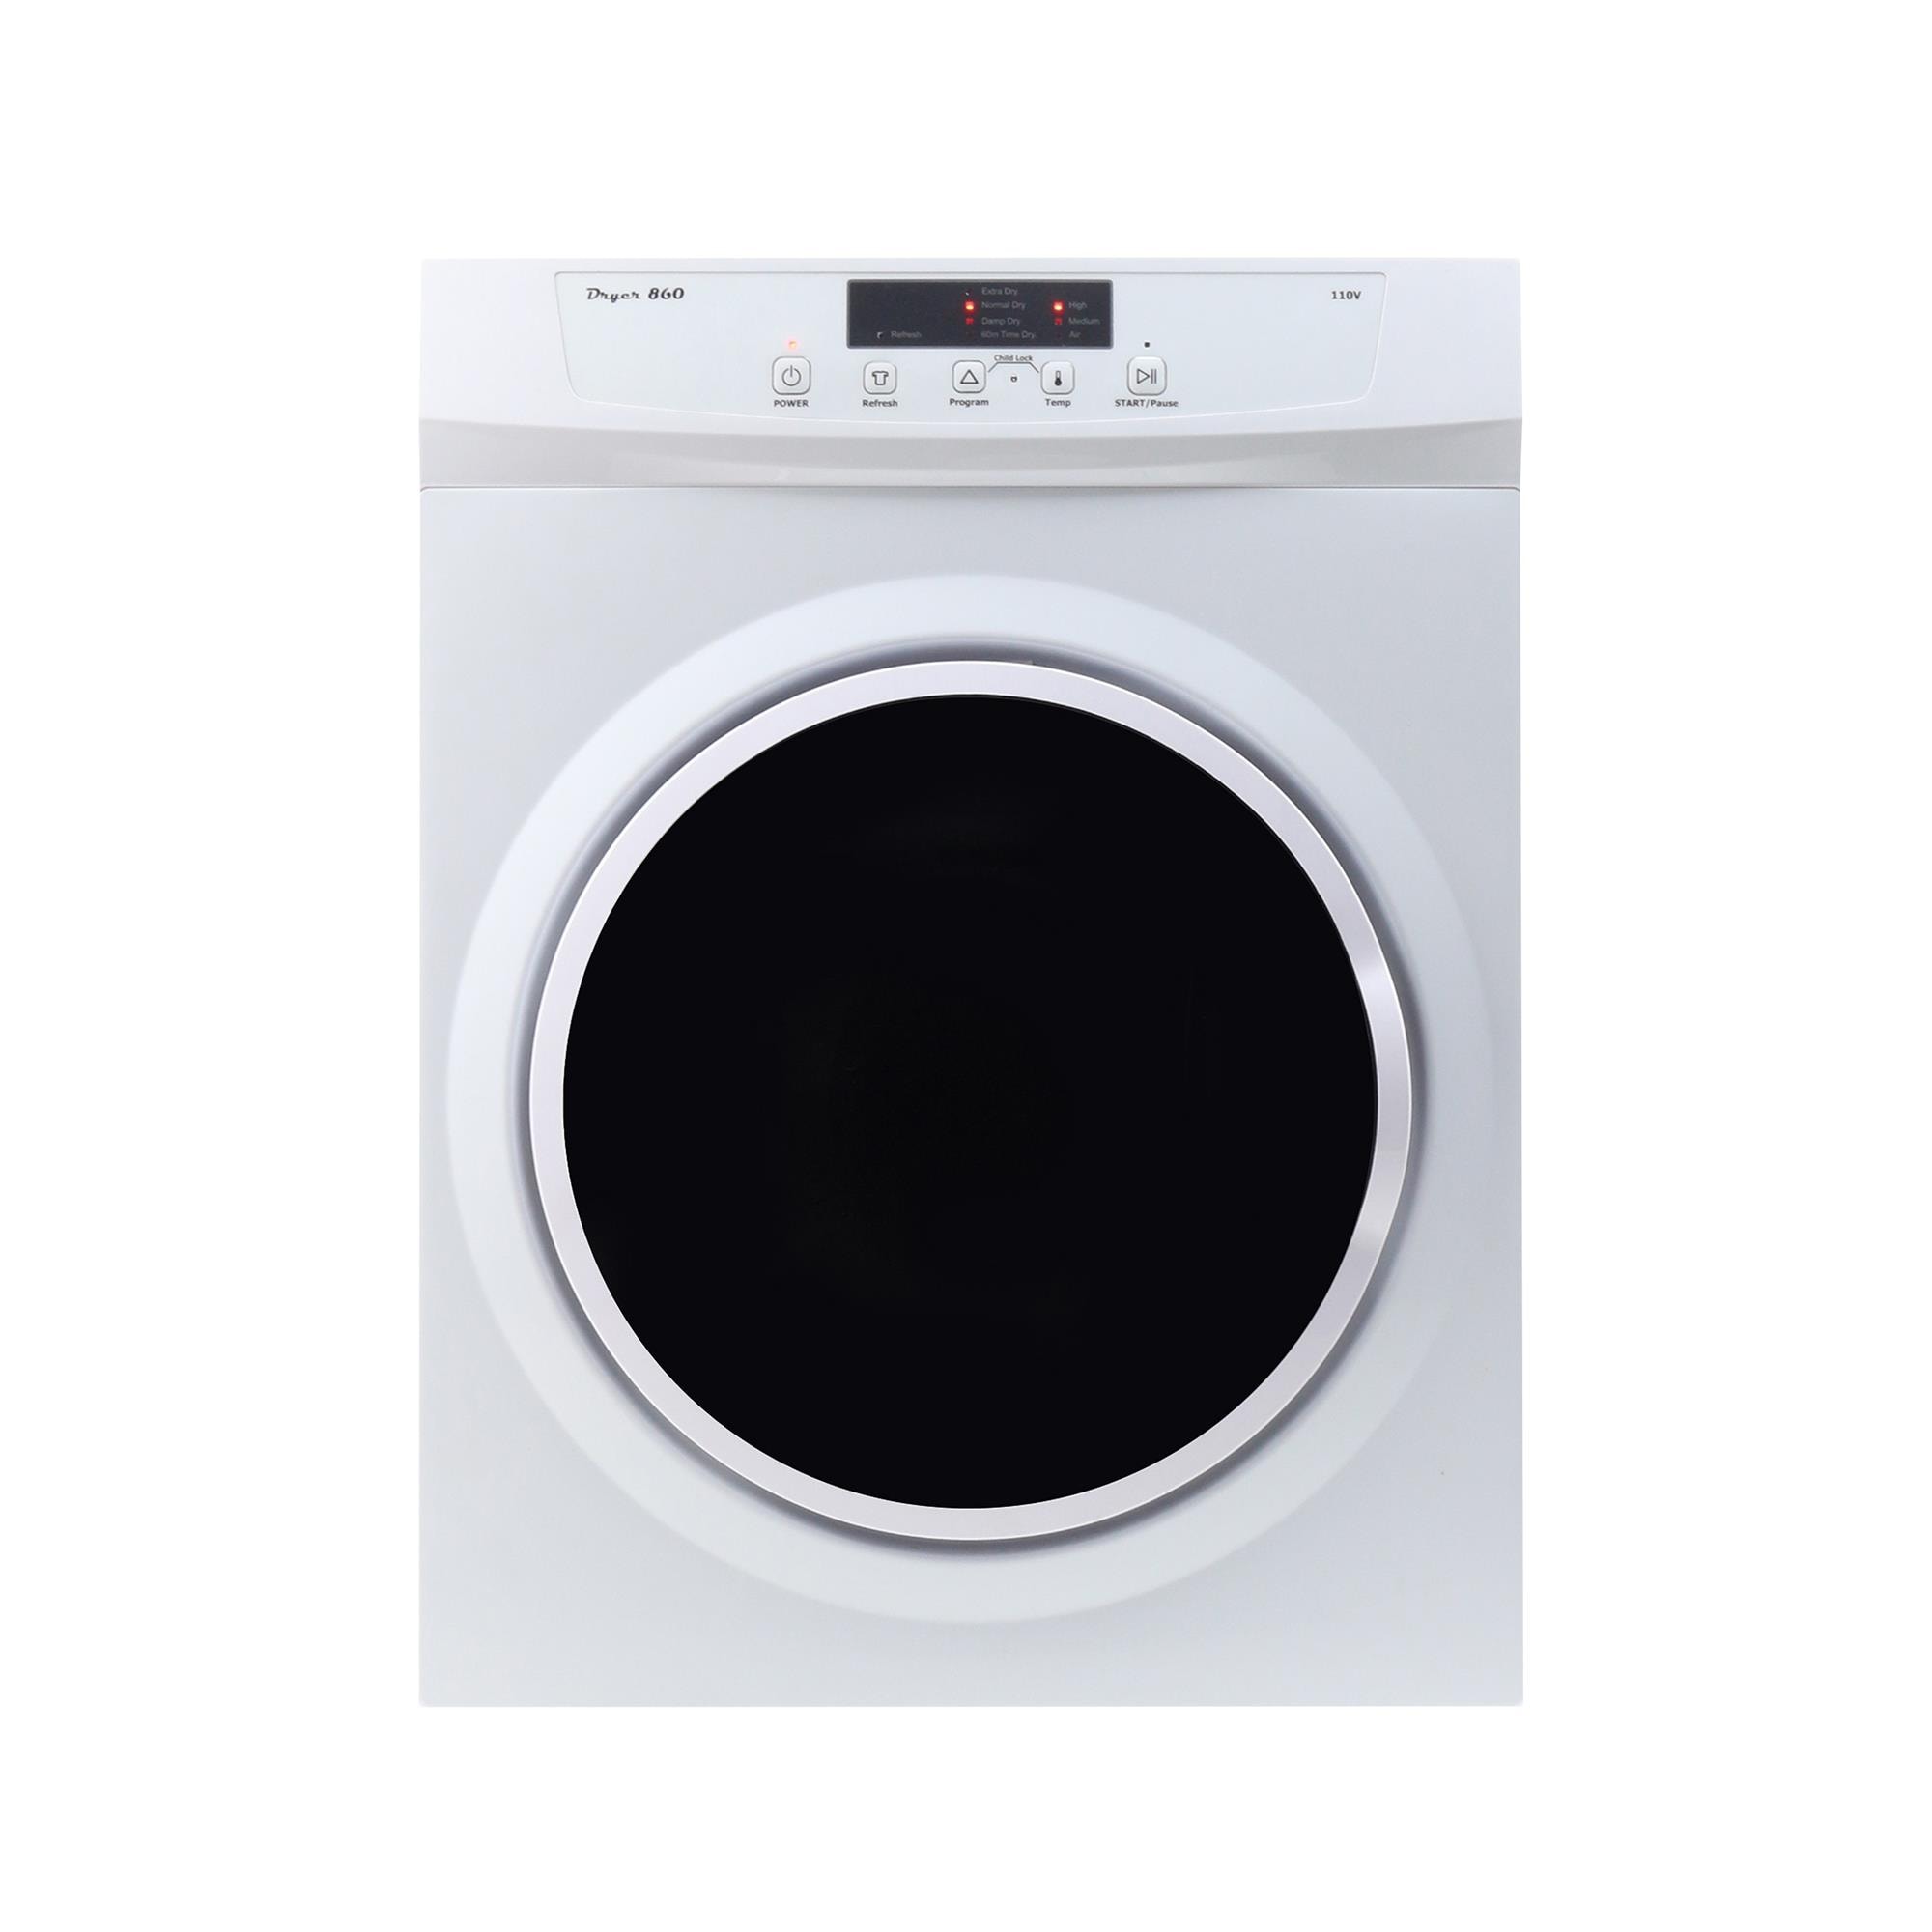 Magic Chef - Small Compact 2.6 cu. ft. Capacity Electric Dryer - Like